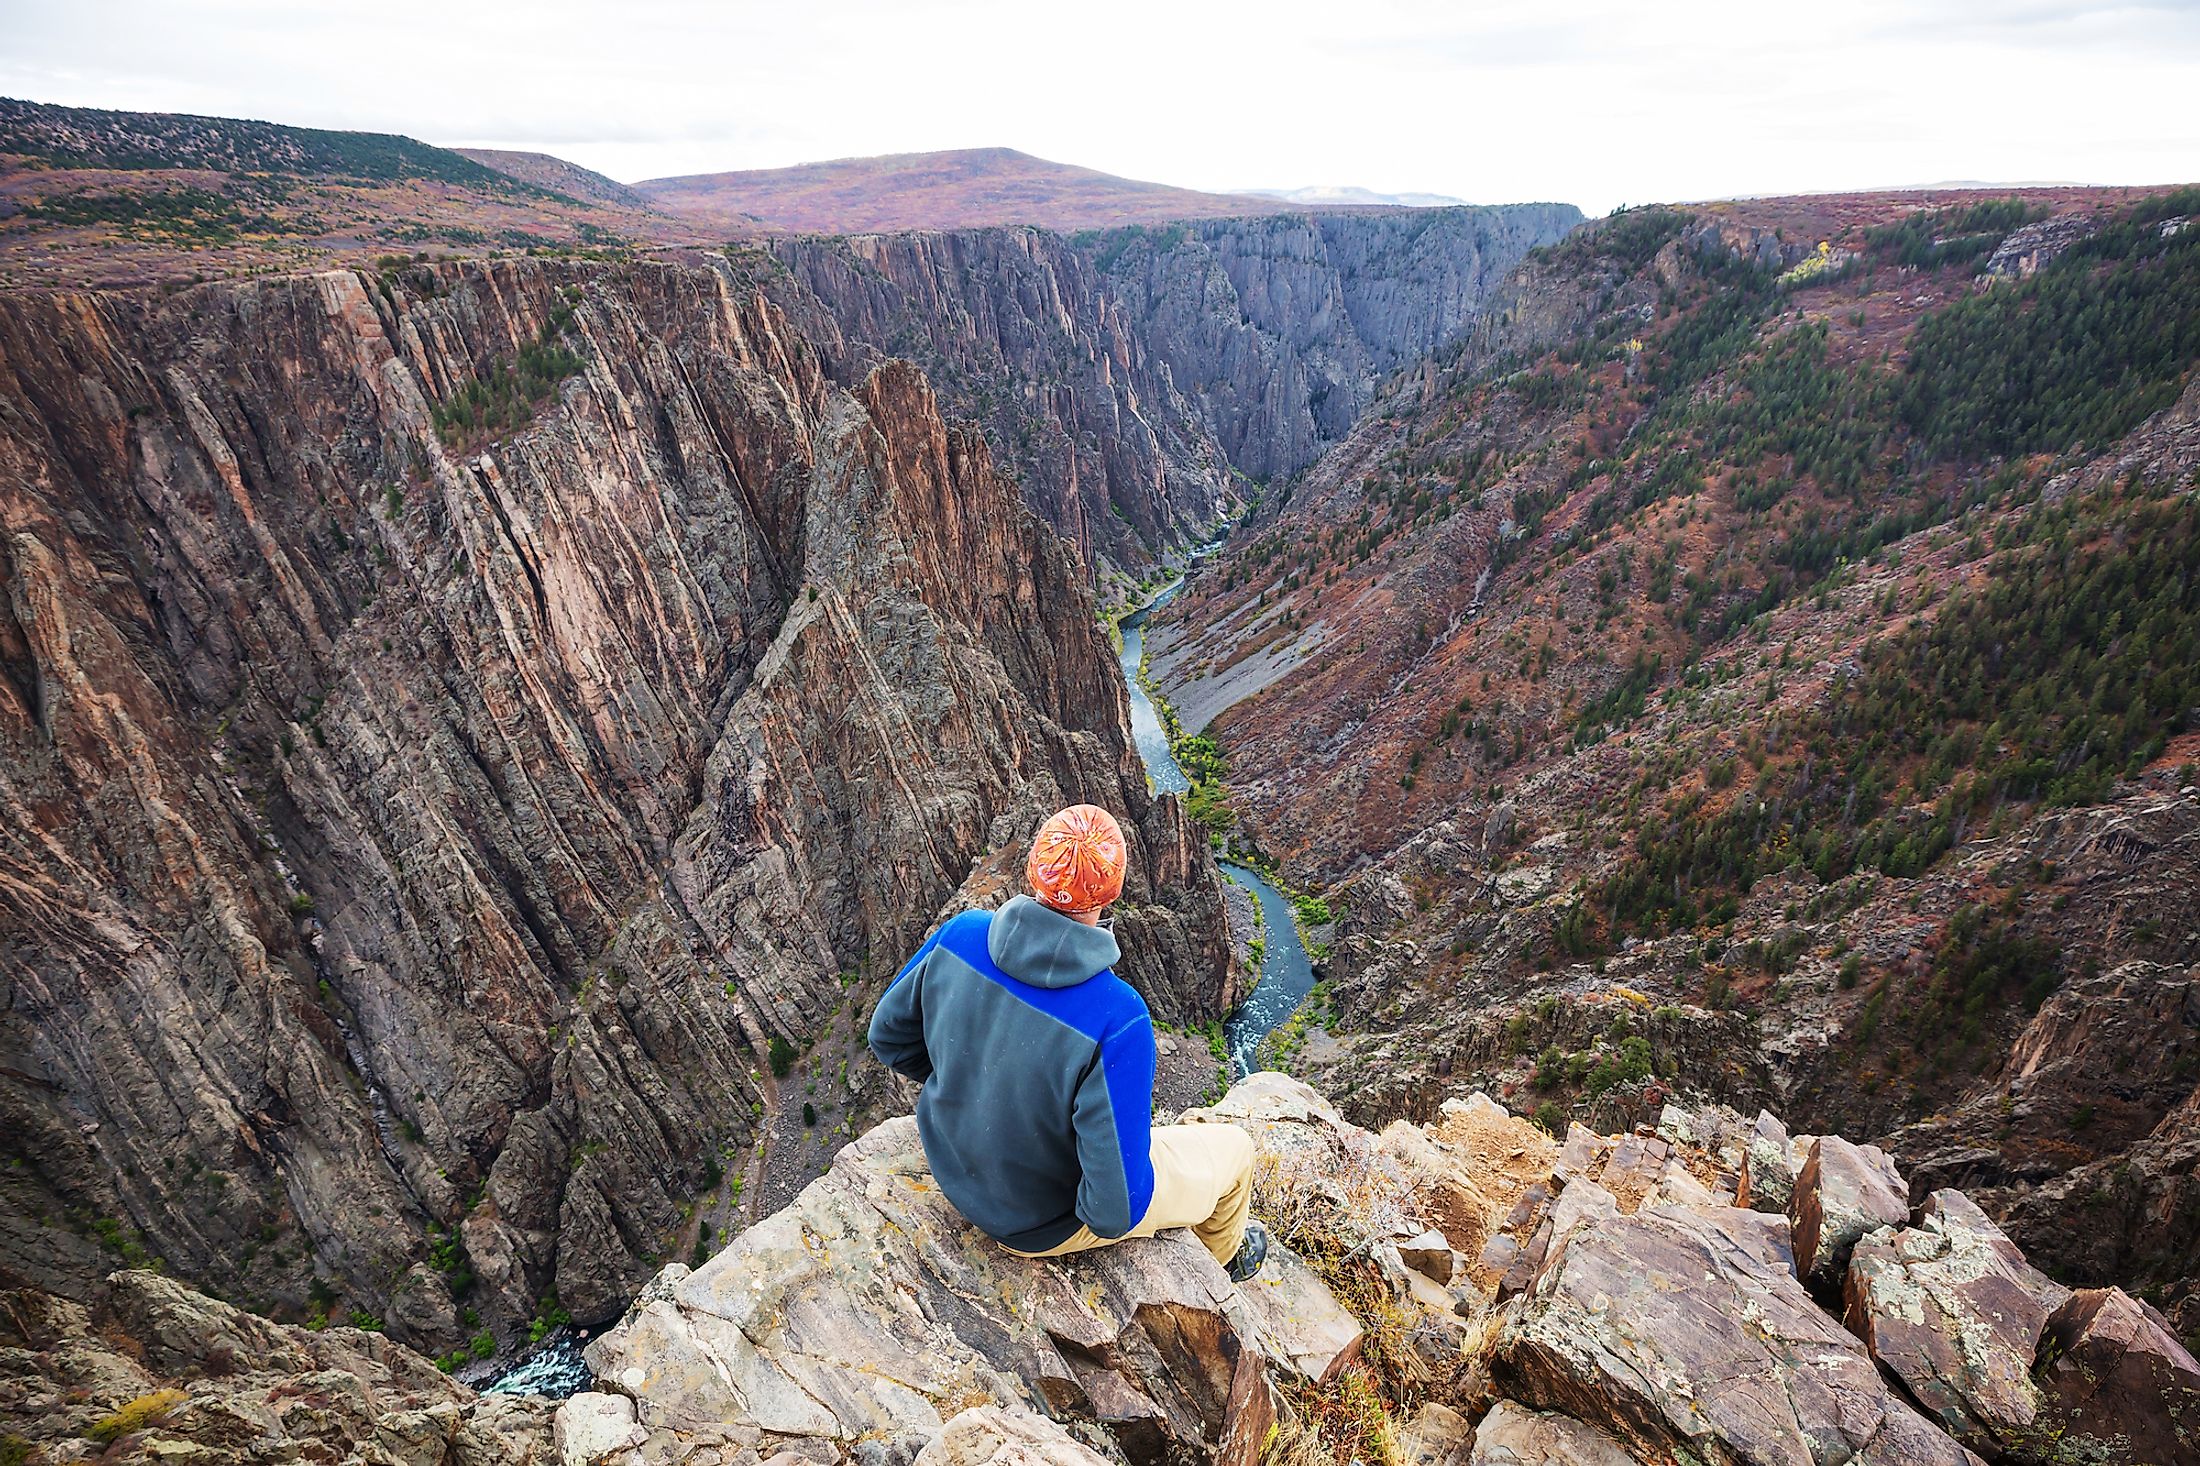 Black Canyon Of The Gunnison National Park